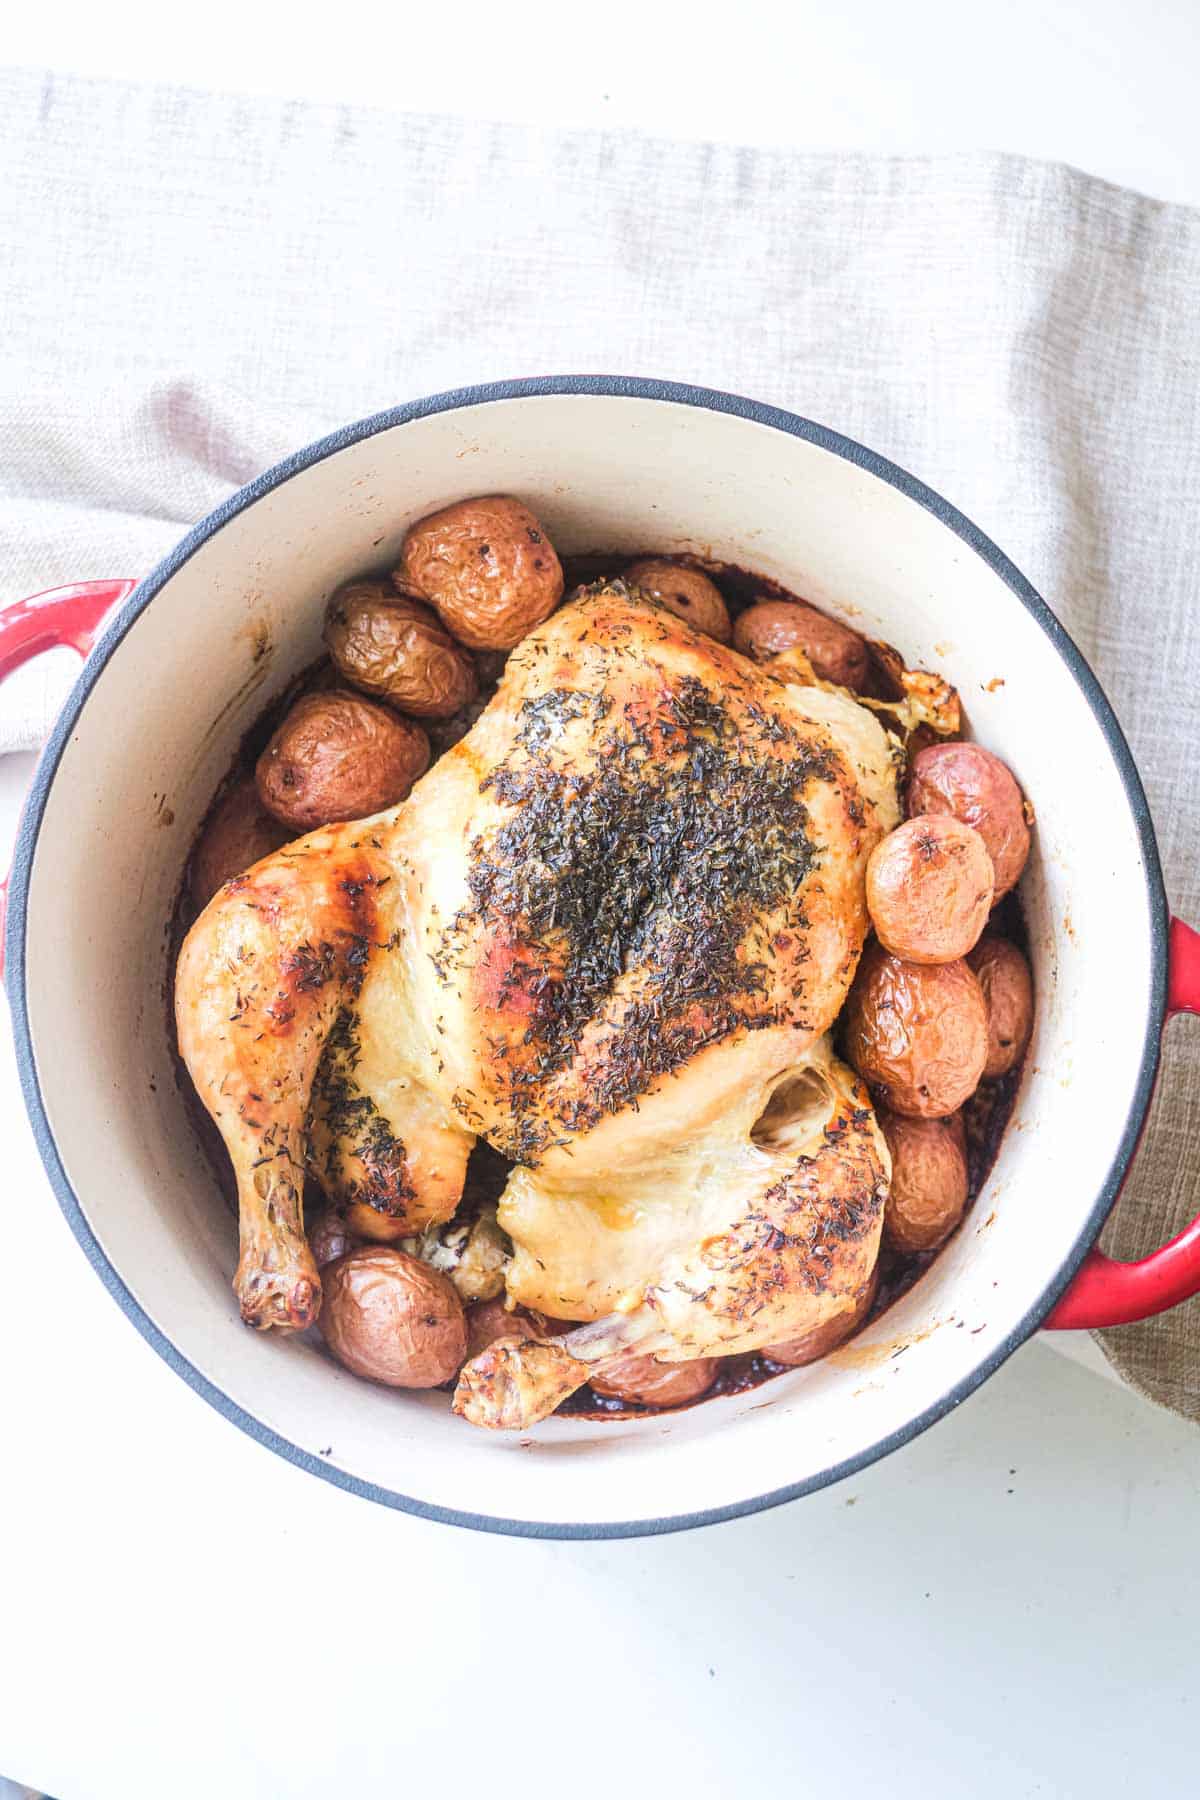 the cooked dutch oven whole chicken ready to be served